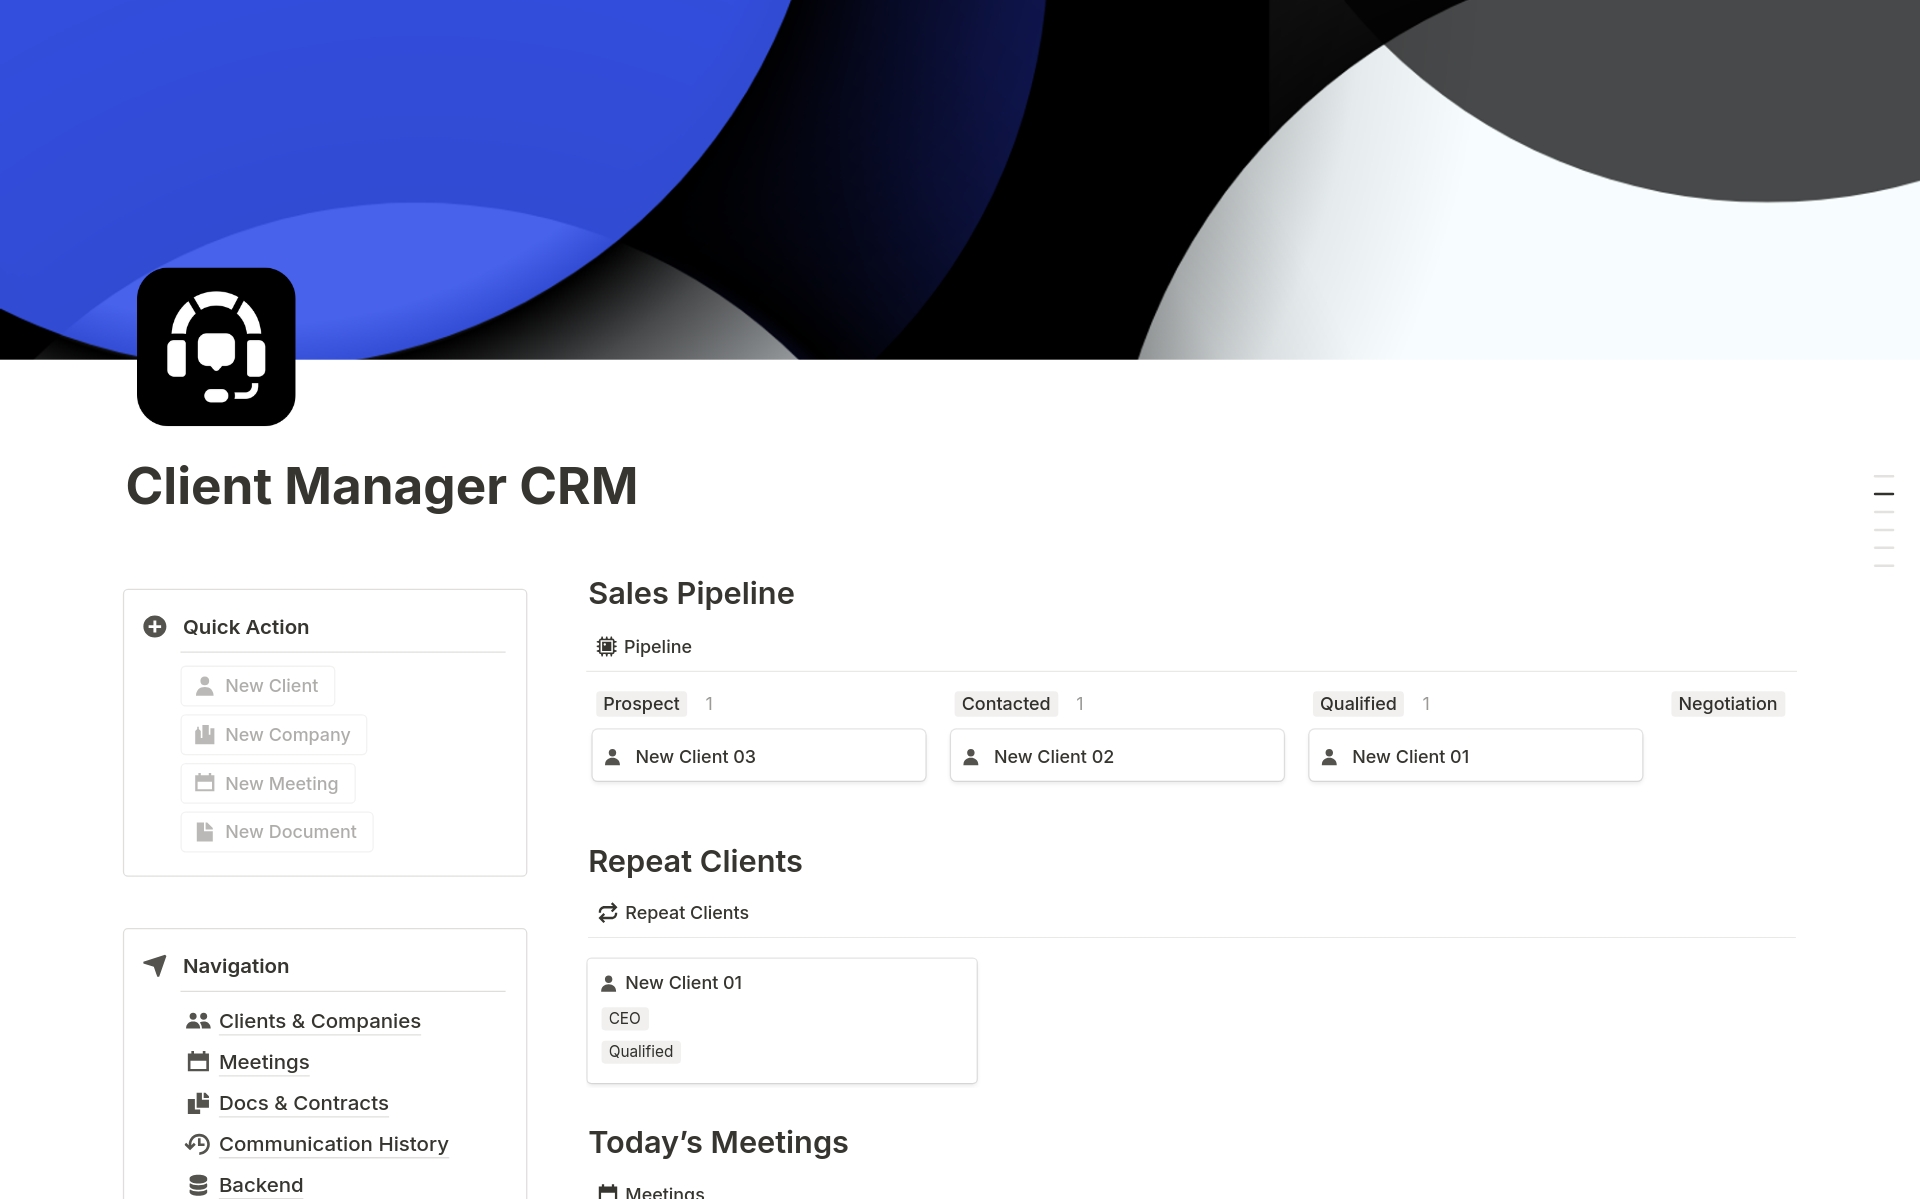 "Nurture Your Relationships: The Definitive Customer Management Template in Notion."